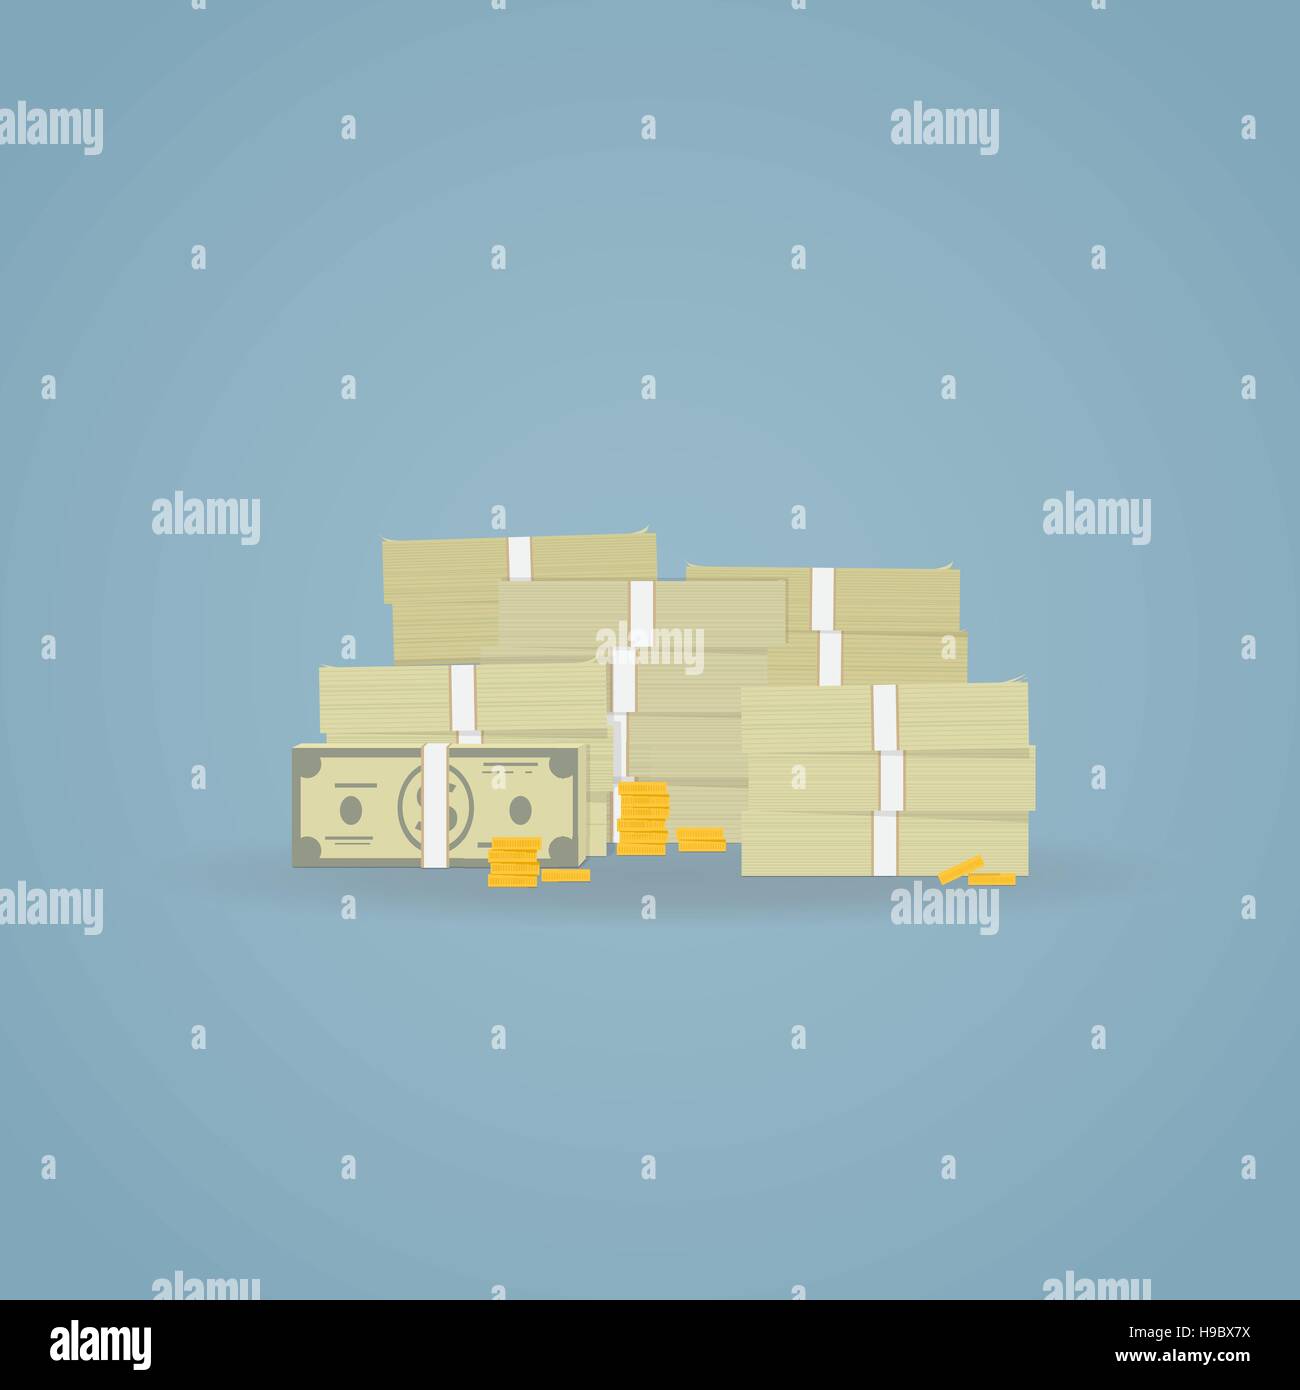 Flat illustration of pile of green dollars. Gold coins and paper dollars stacked. Stock Vector